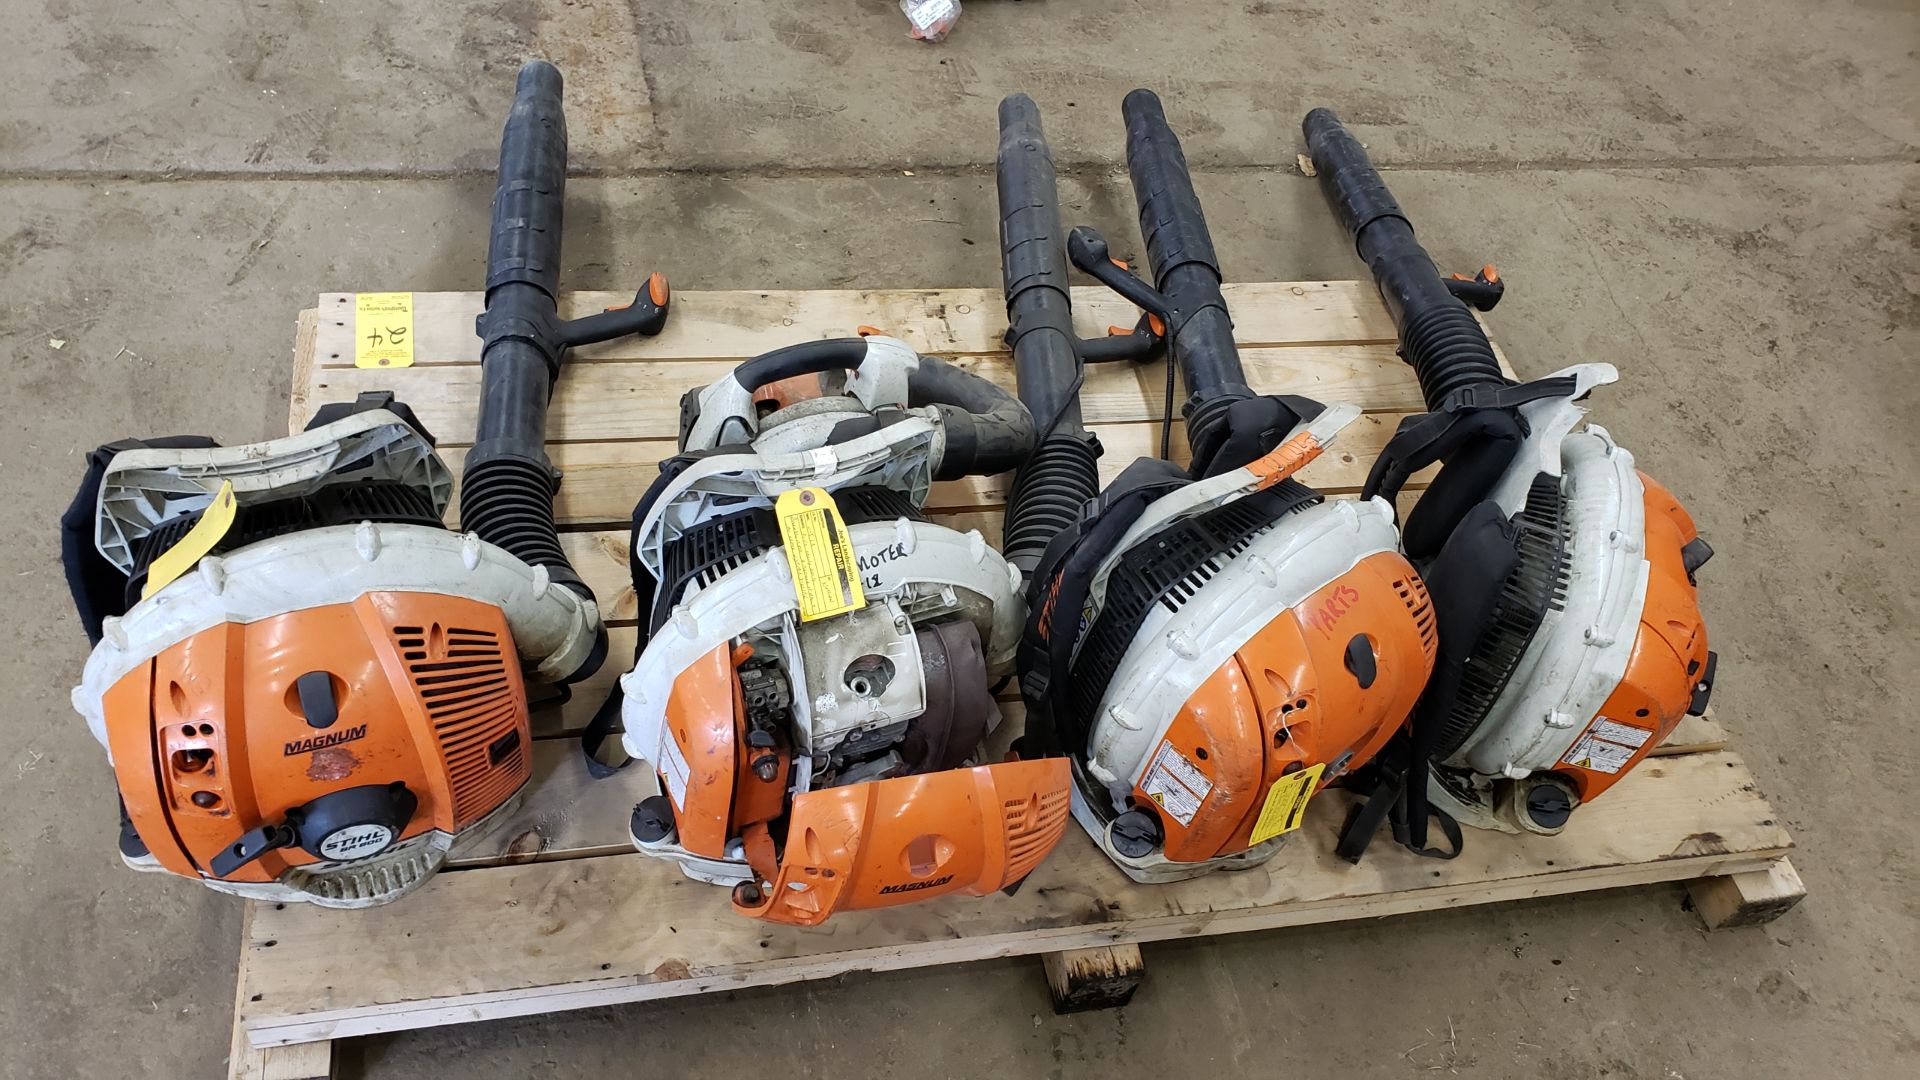 Stihl BR600 Gas-Powered Blowers (Condition Unknown)